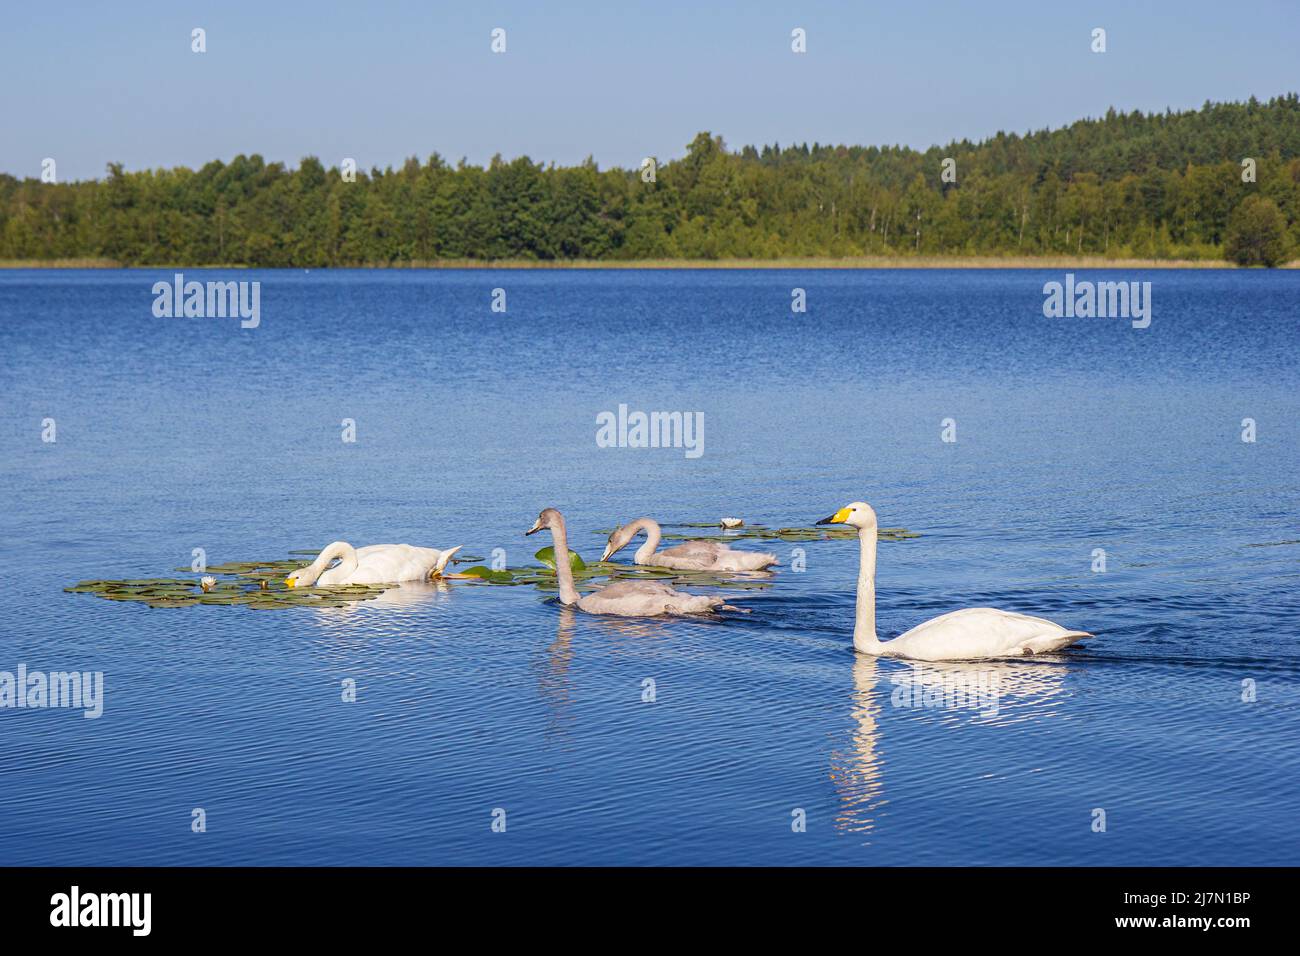 Two adult whooper swans (Cygnus cygnus) (also known as the common swan) and two young swans on a lake in Finland in the summer. Stock Photo